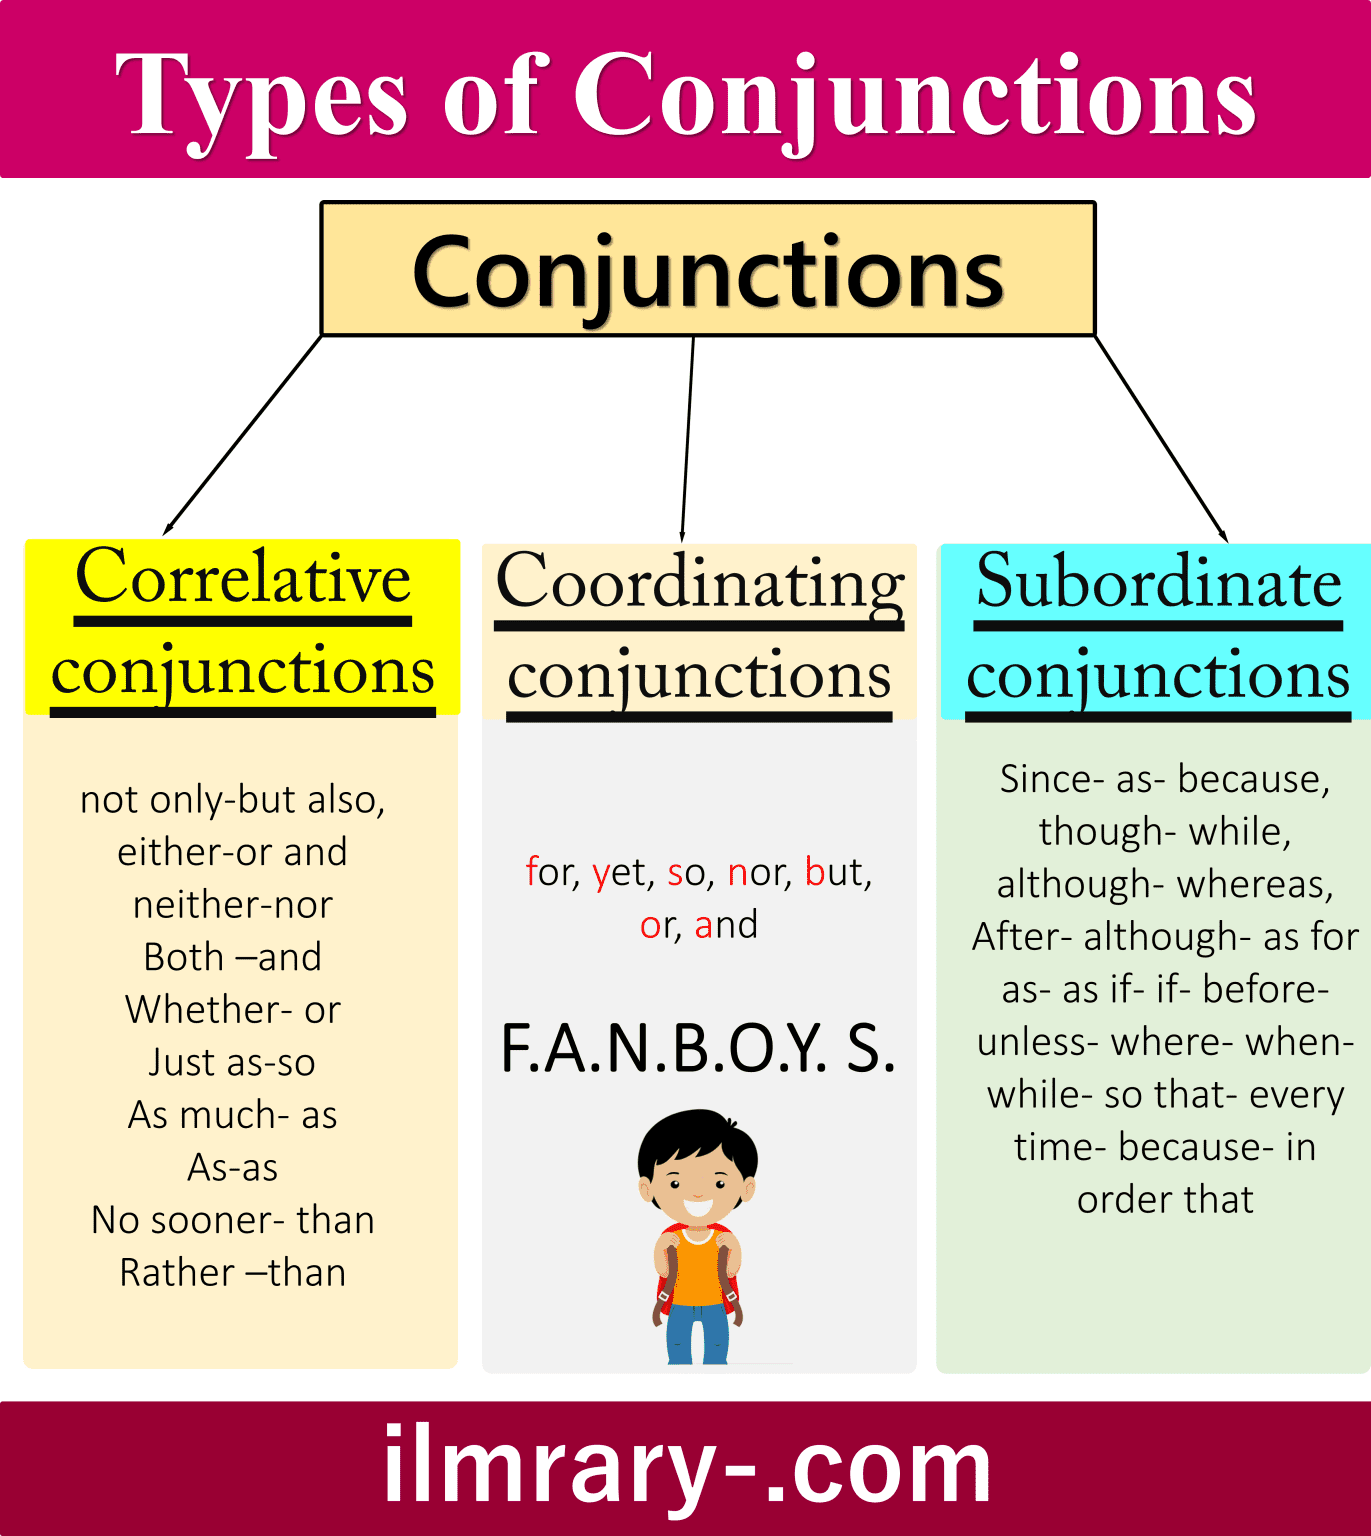 conjunction-definition-and-all-types-with-examples-ilmrary